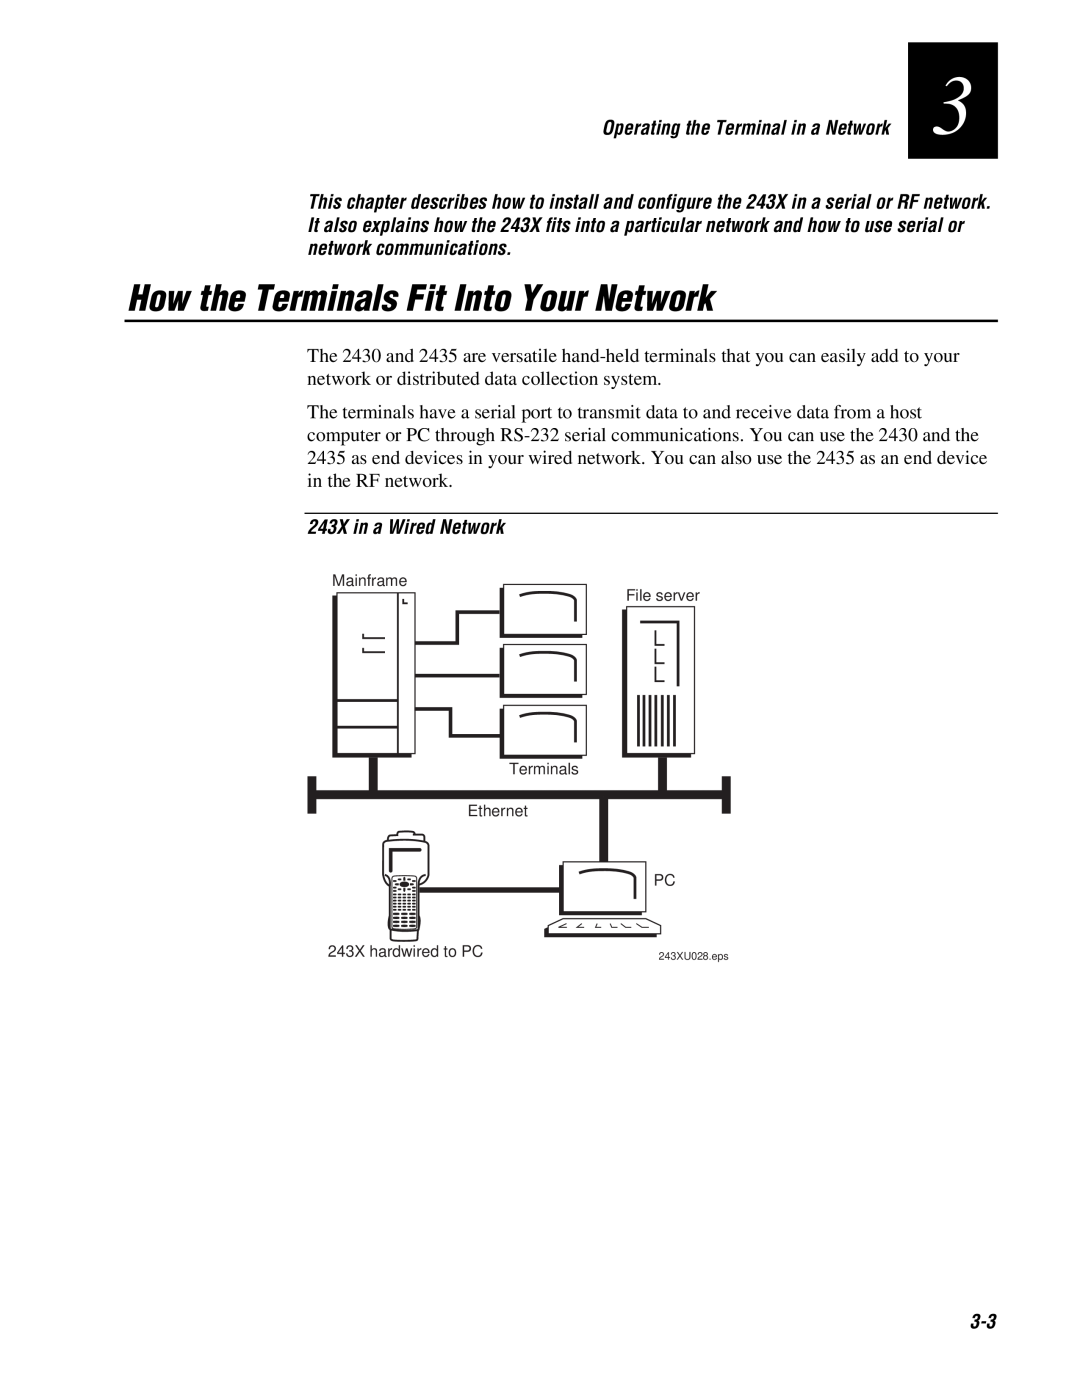 IBM user manual How the Terminals Fit Into Your Network, 243X in a Wired Network 